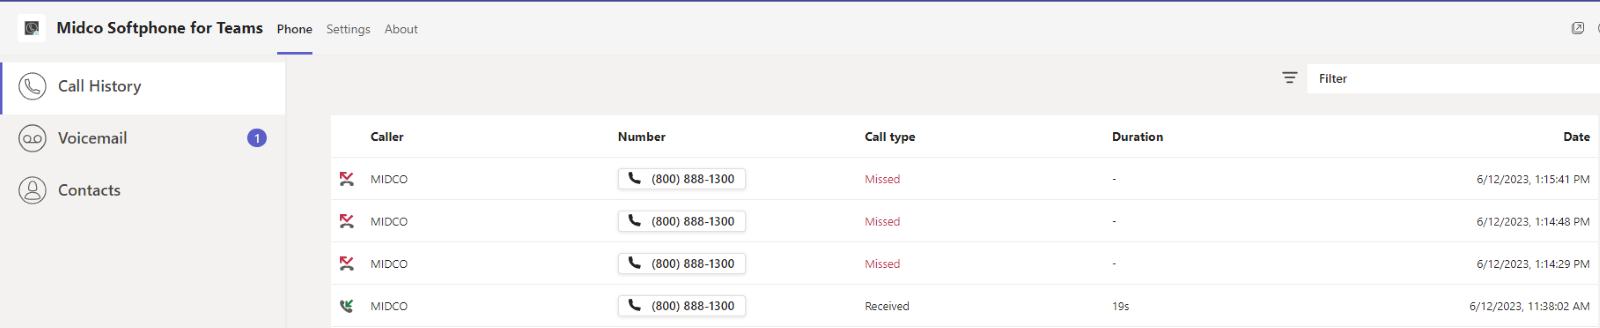 A screenshot of Call History on the Midco Softphone for Teams app